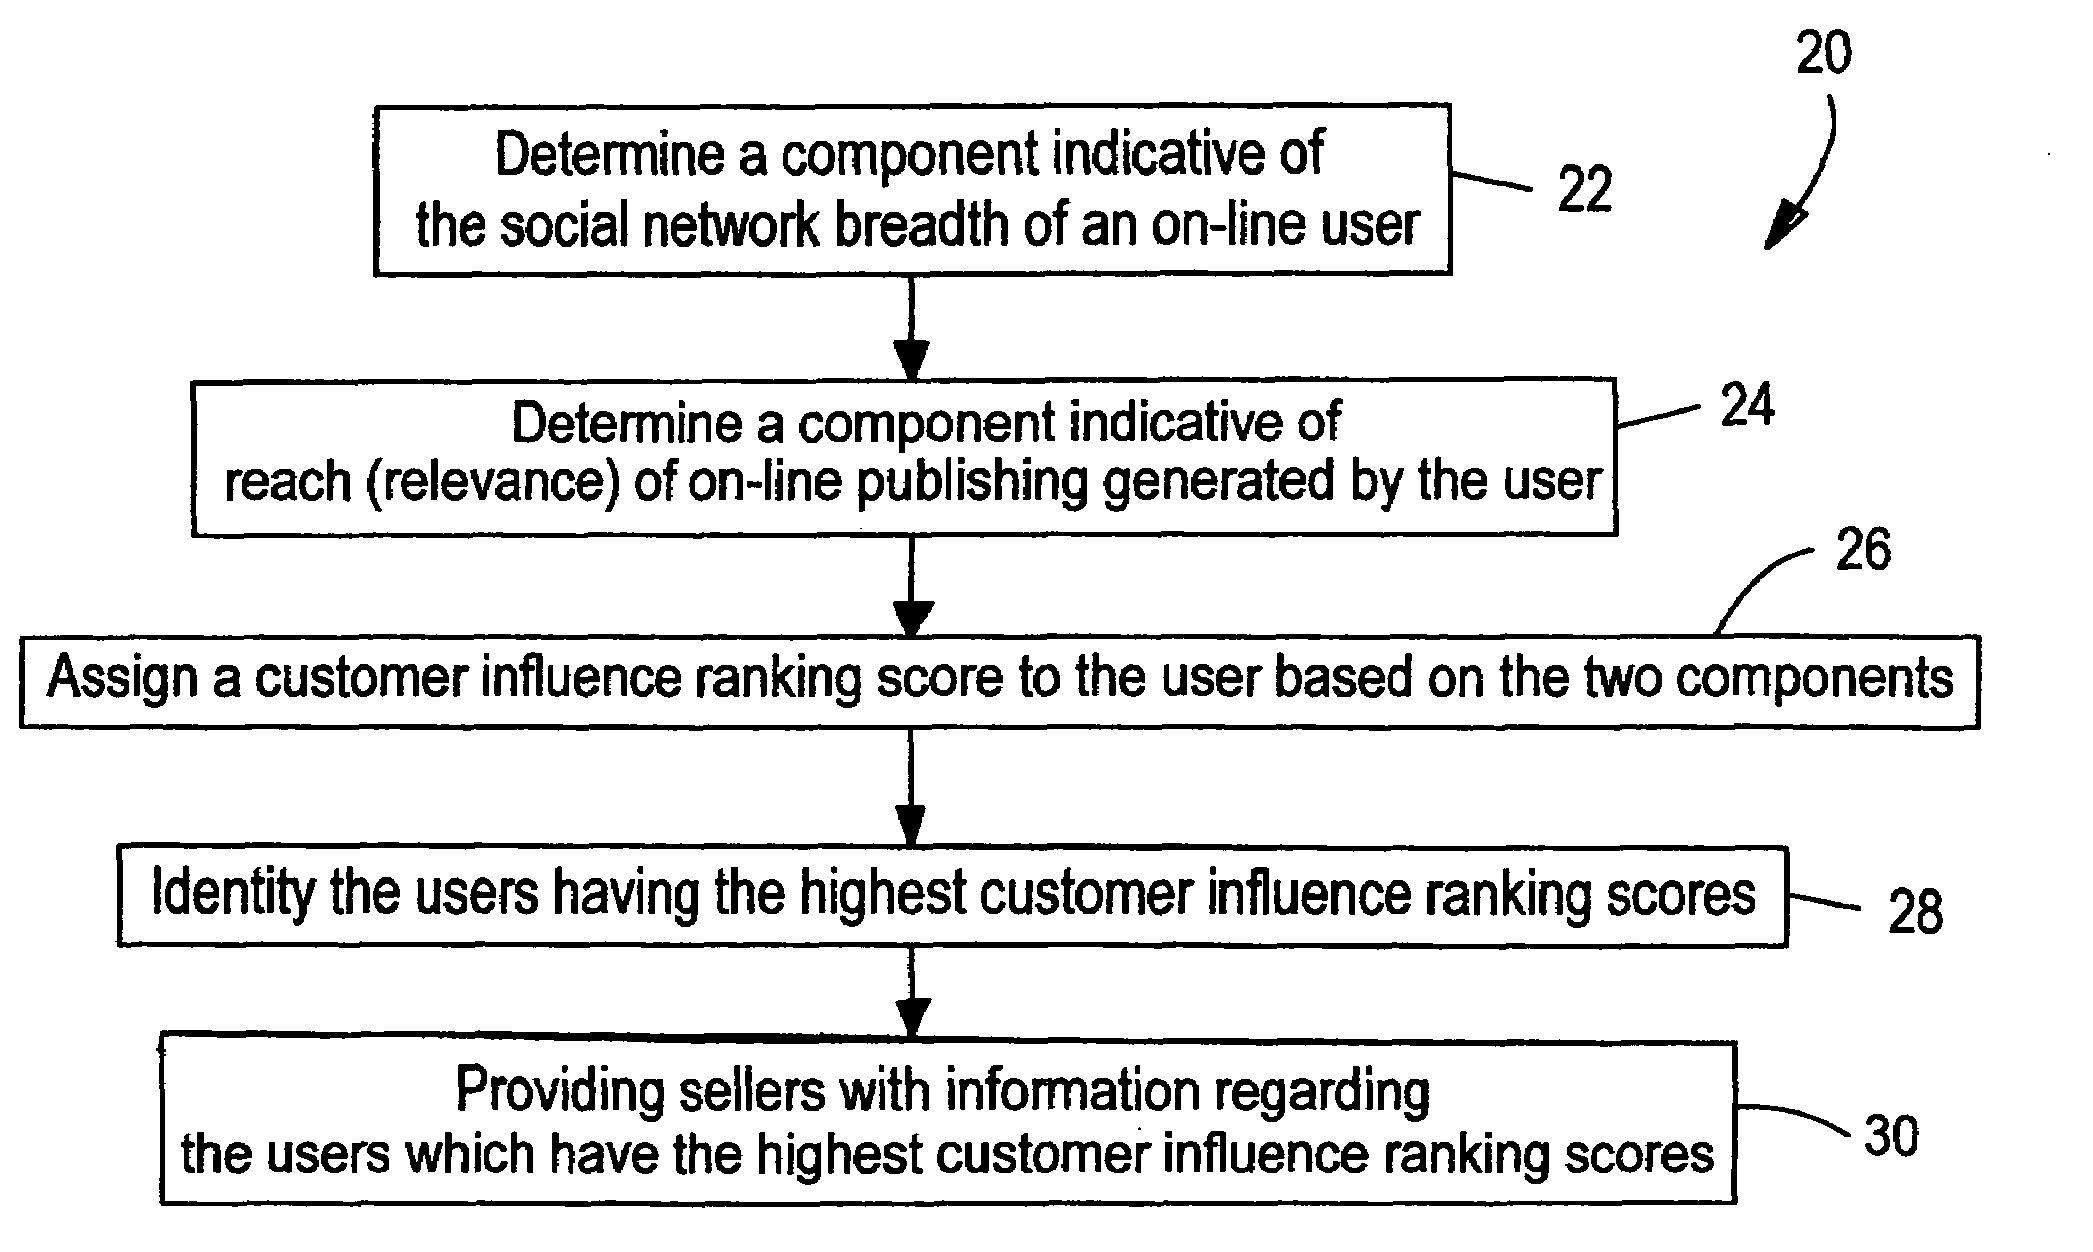 Method and system for assigning customer influence ranking scores to internet users